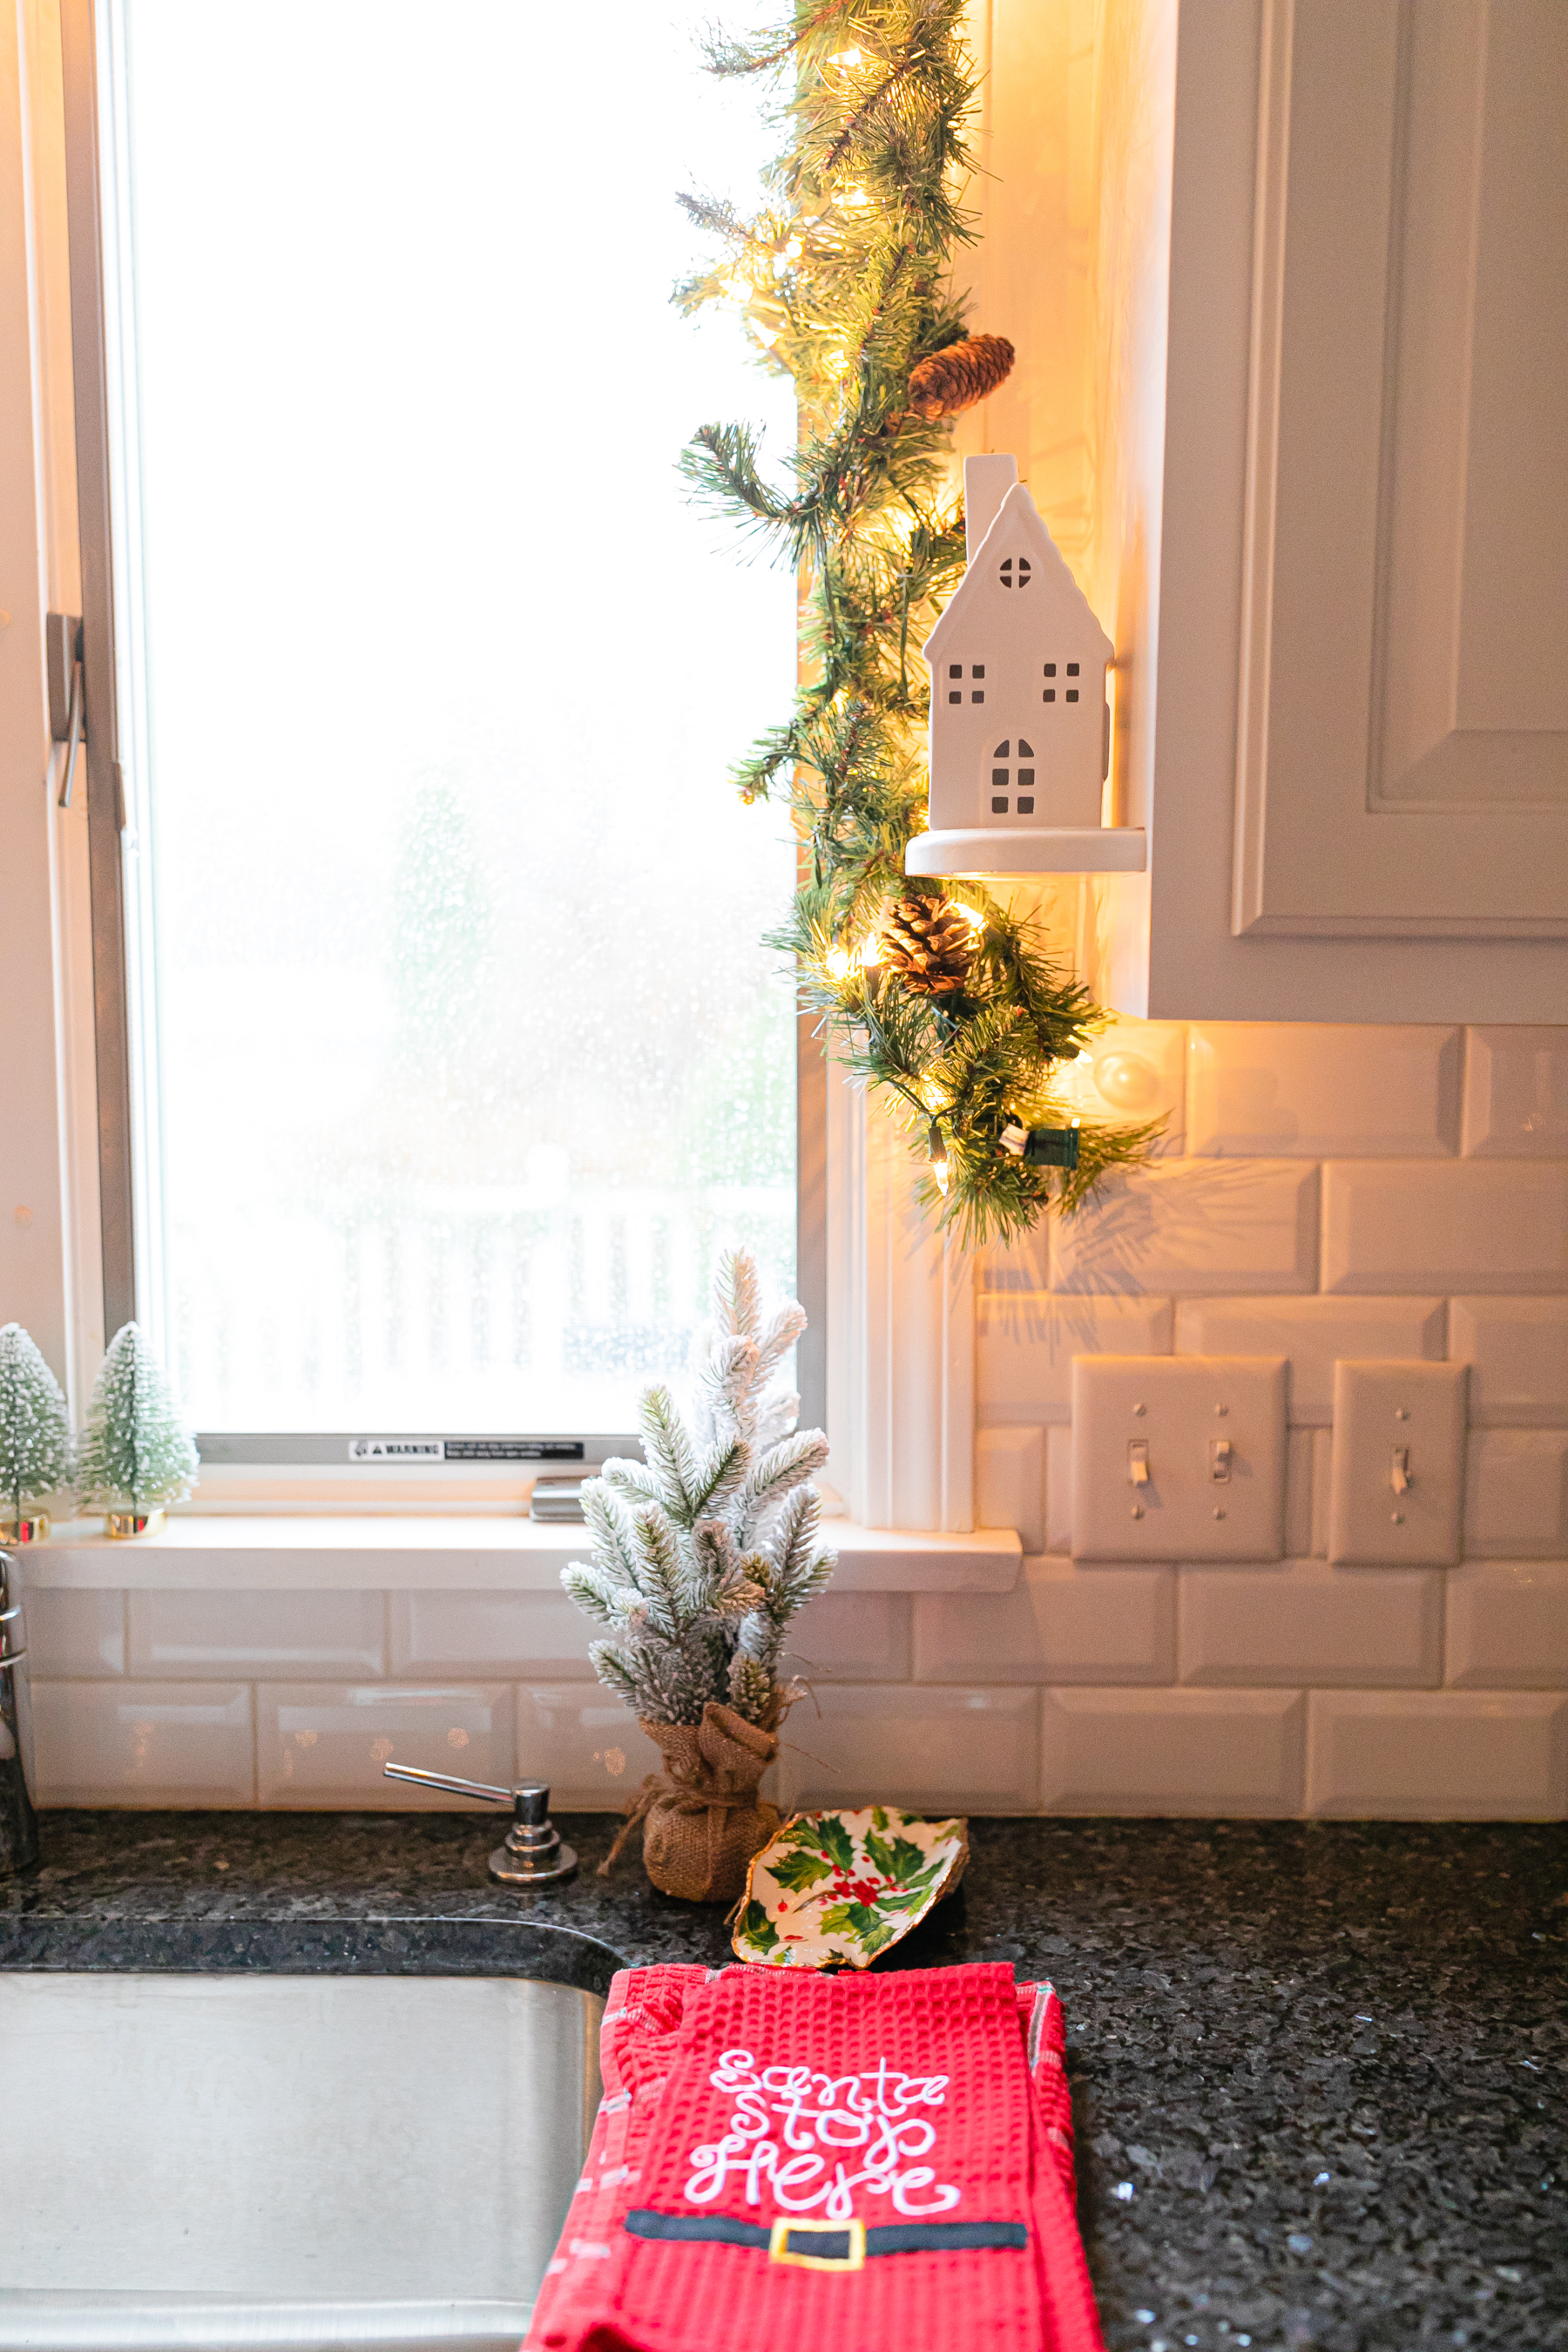 real garland above kitchen sink with lights